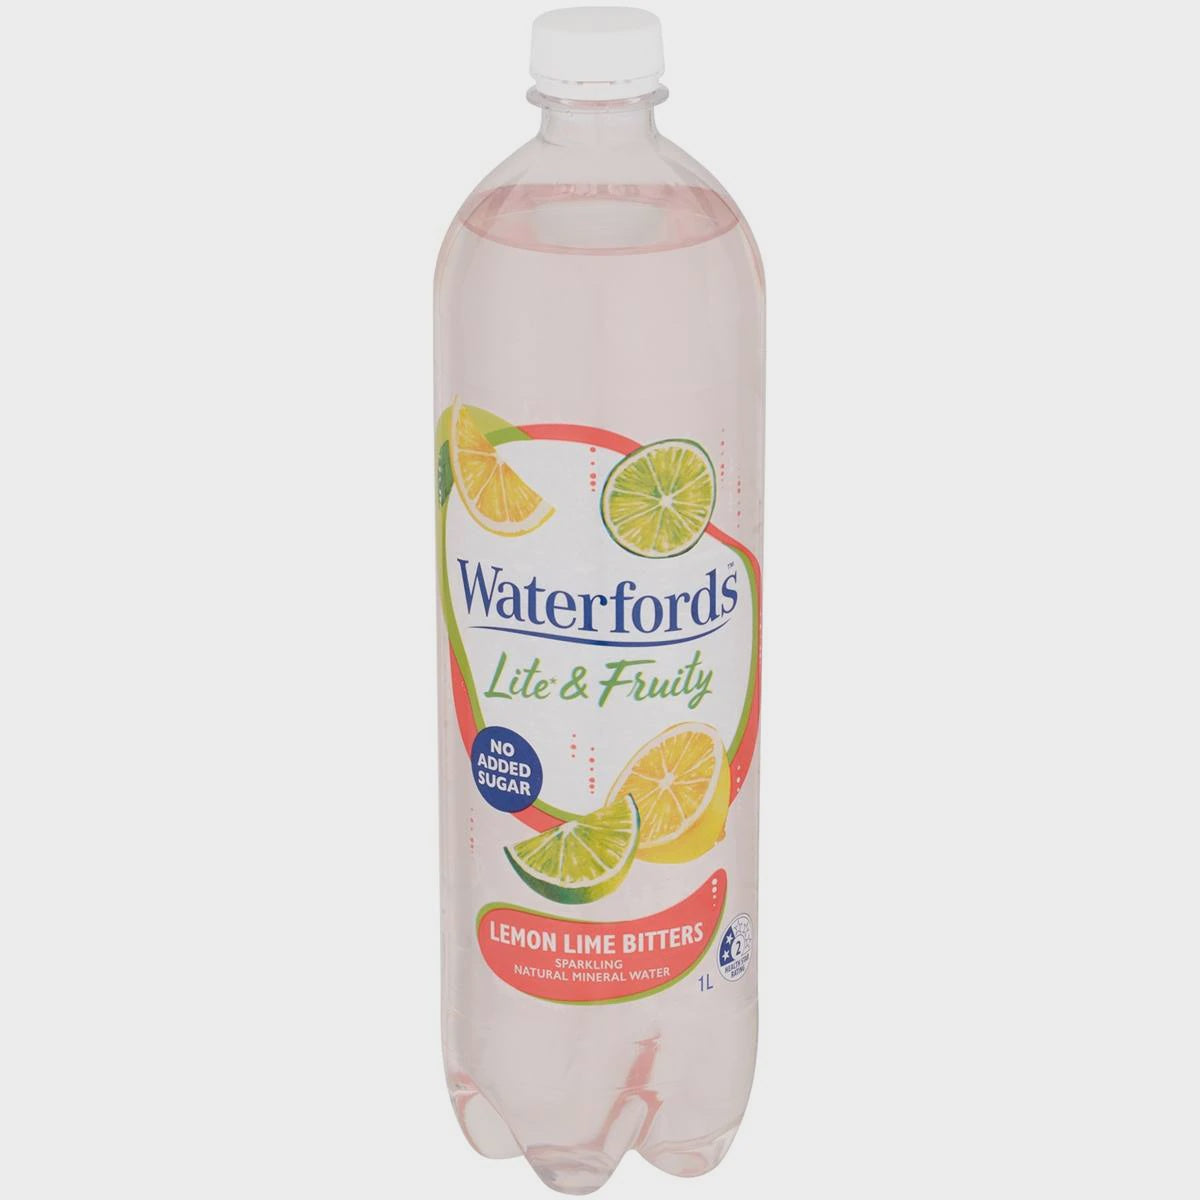 Waterfords Mineral Water Lite & Fruity Lemon Lime Bitters 1L